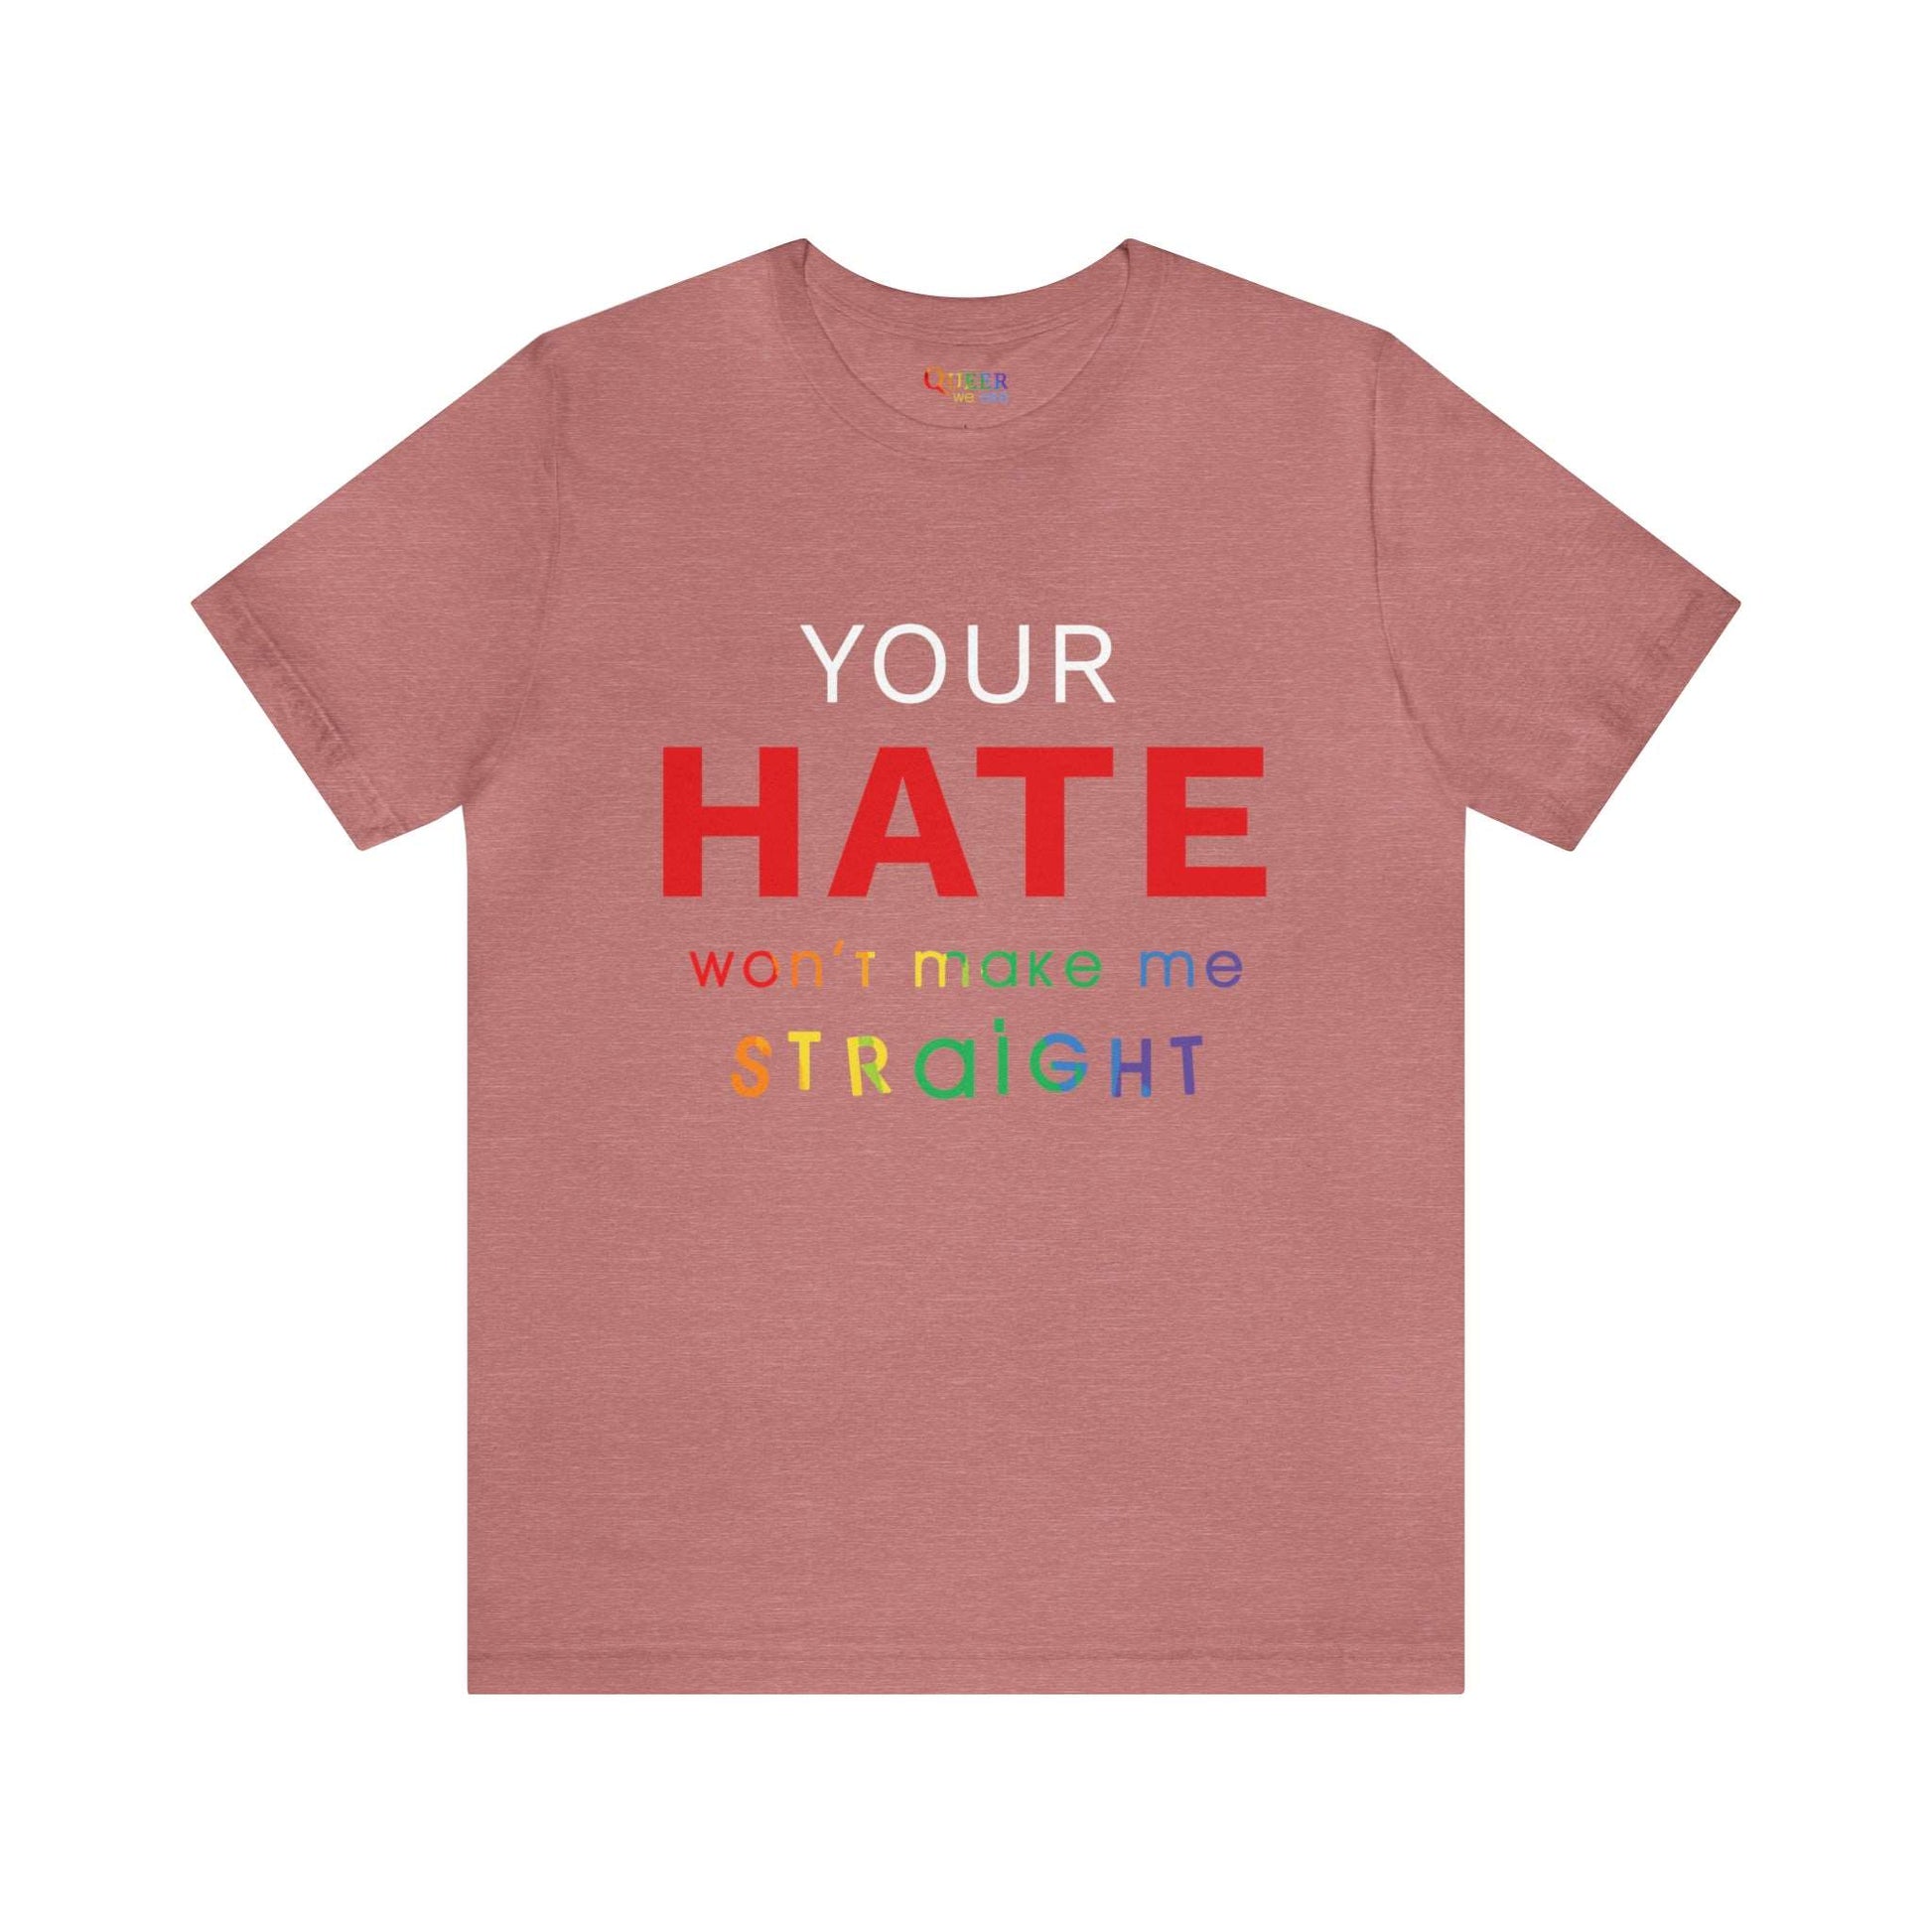 Your Hate Won't Make Me Straight Unisex T-Shirt - Queer We Are Shop